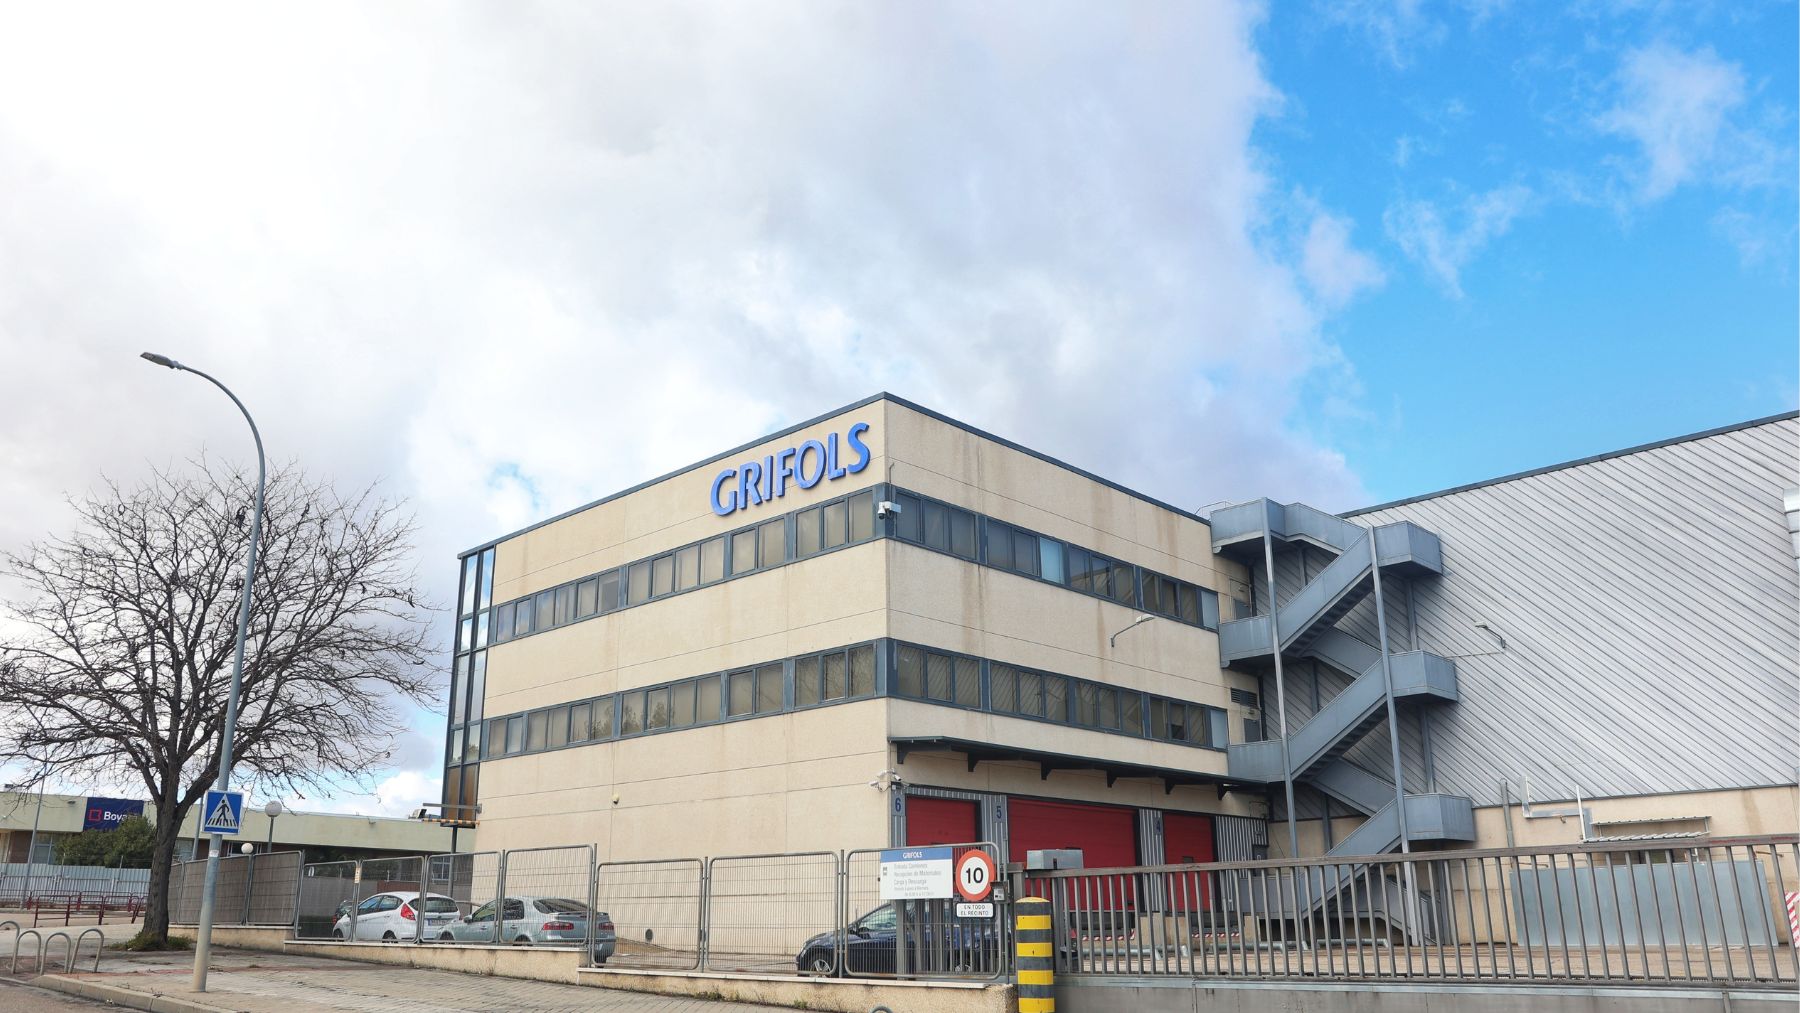 Grifols: the CNMV requires more information from Scranton - Kiratas